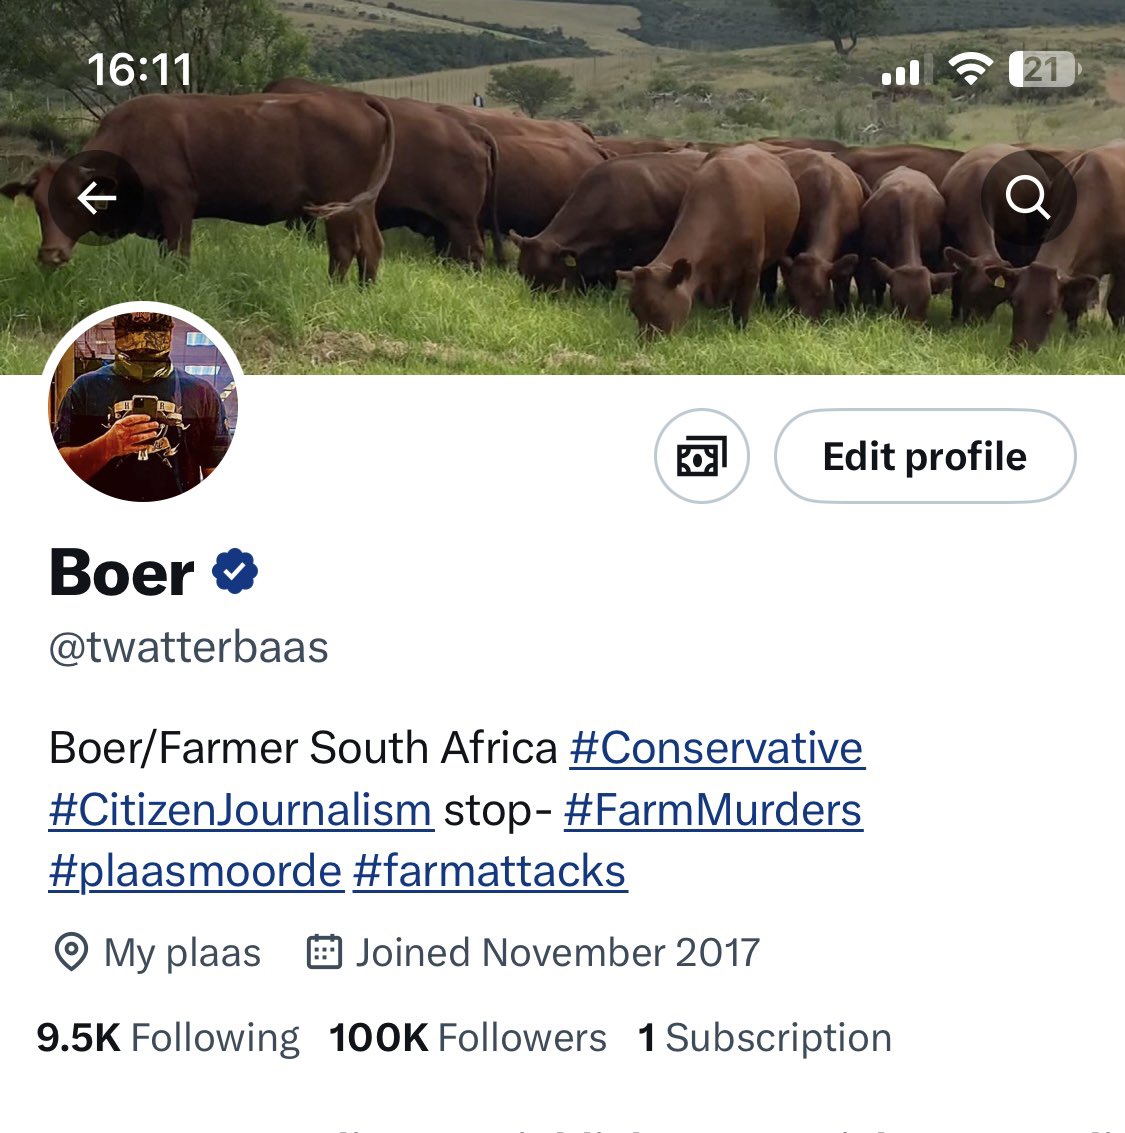 Wow 100k followers. Thank each and every one of you.
#WeWillNotBeSilenced